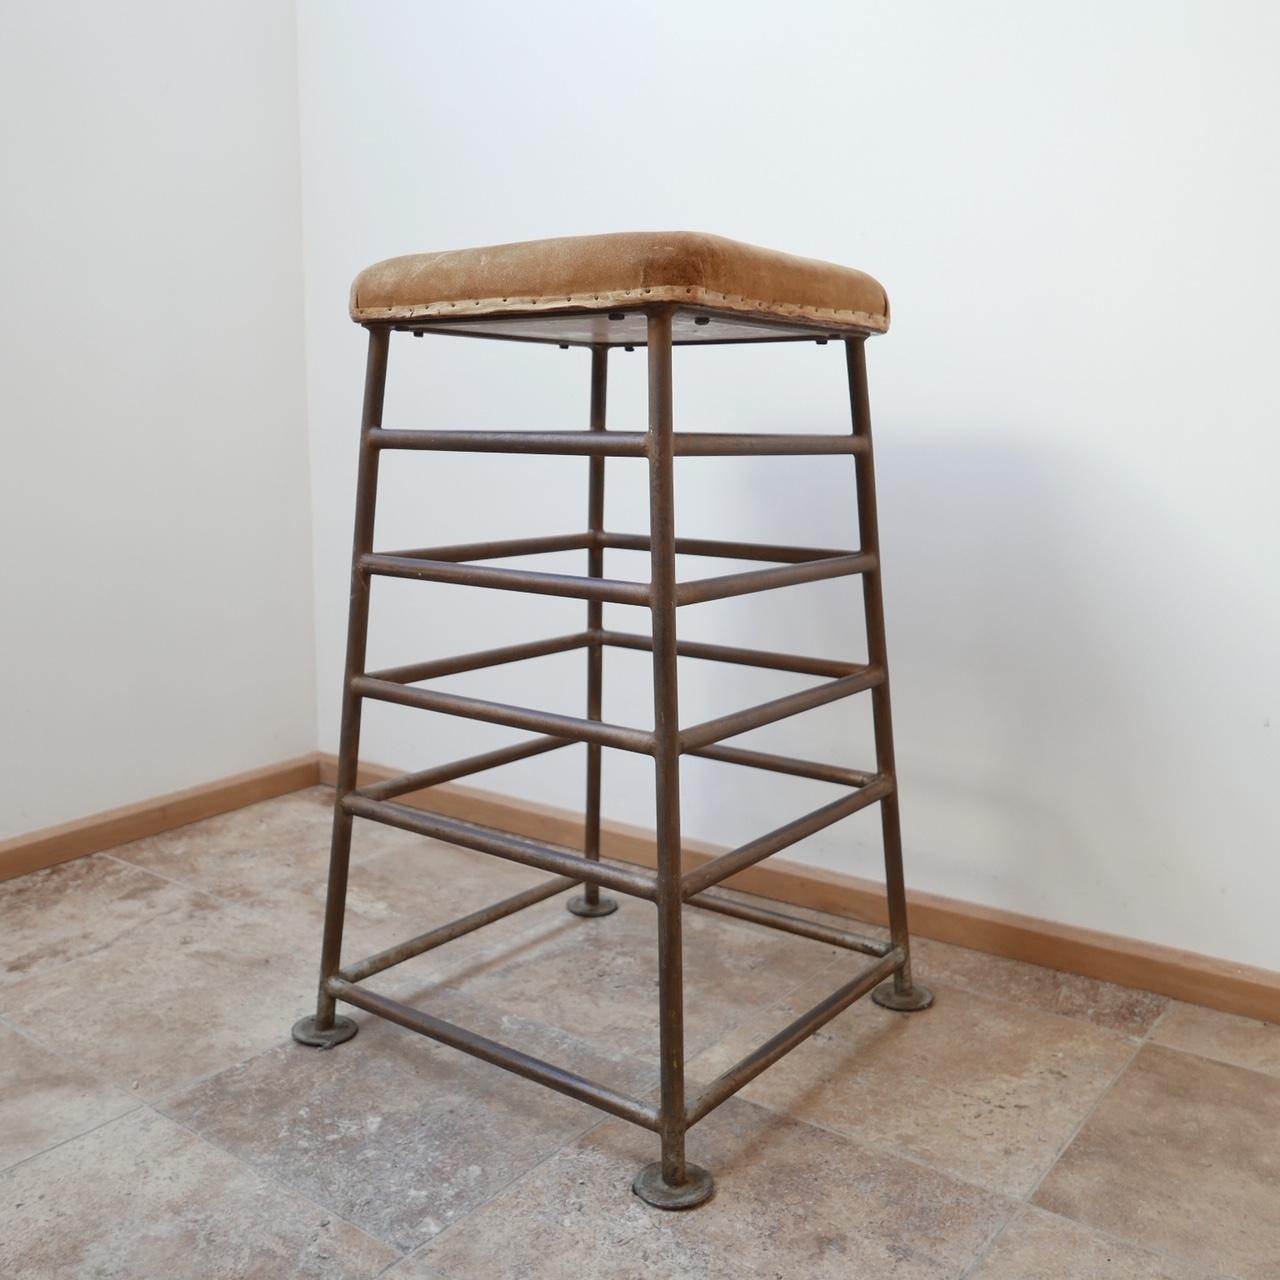 A pair of tall stools.

English, circa 1930s.

Metal and suede. Originally used in a gym or English school. 

Good patina, small bit of damage to the suede of one of the stools (see photo).

Dimensions: 90 H x 59 D x 59 W in cm.